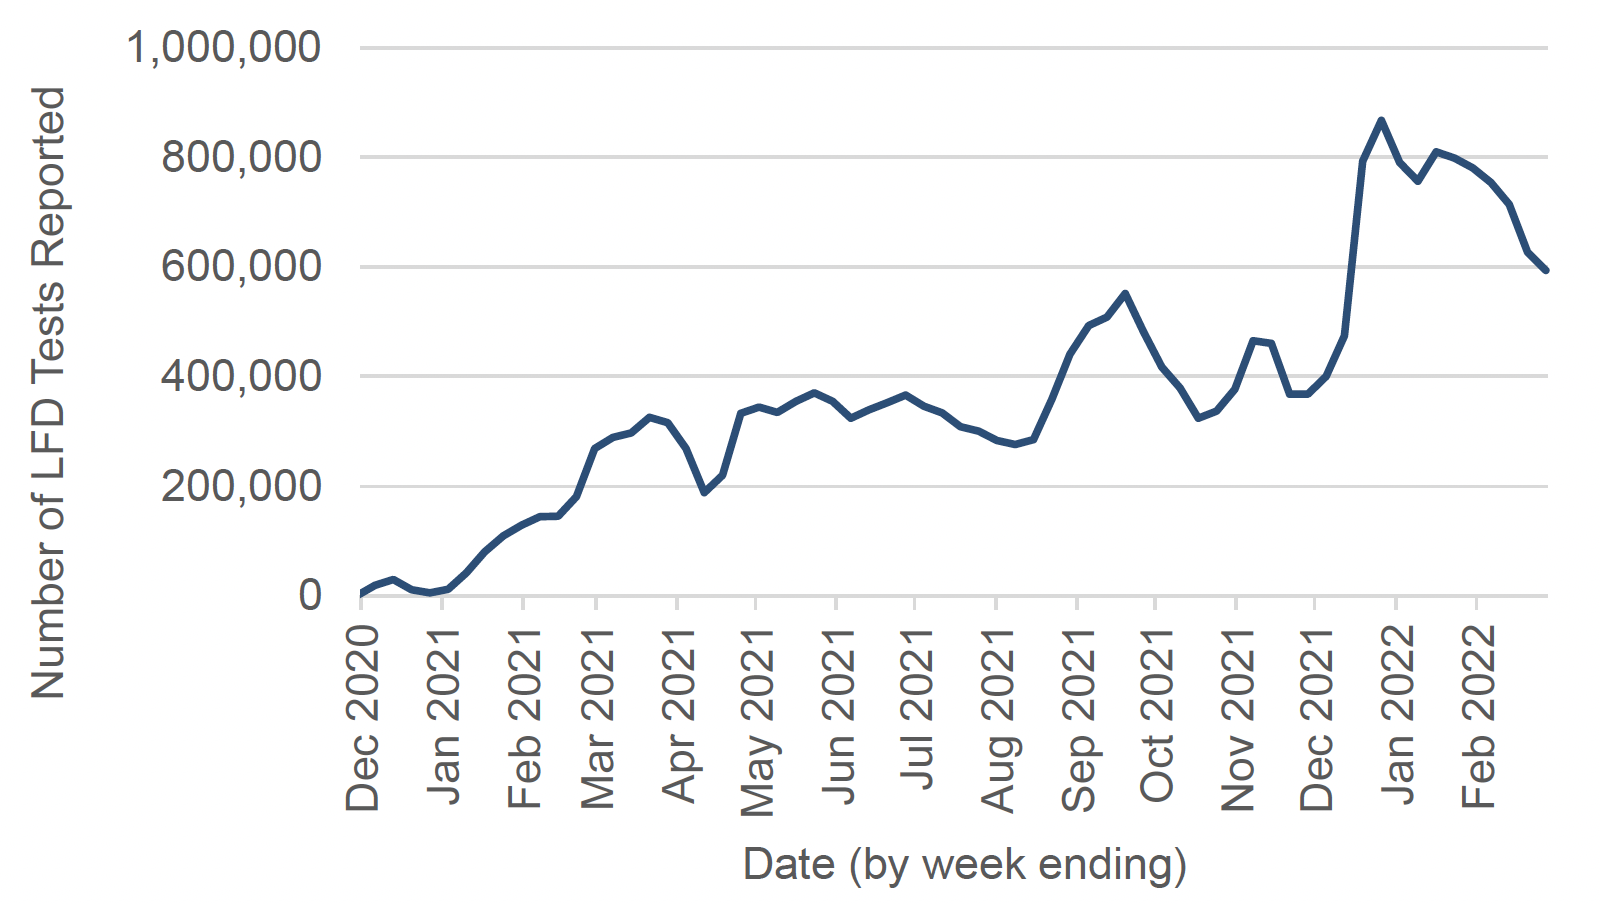 a line chart showing a trend in the number of LFD tests reported in Scotland since December 2020. It shows a fluctuating but increasing trend since December 2020, with peaks in March 2021, September 2021, November 2021 and December 2021.